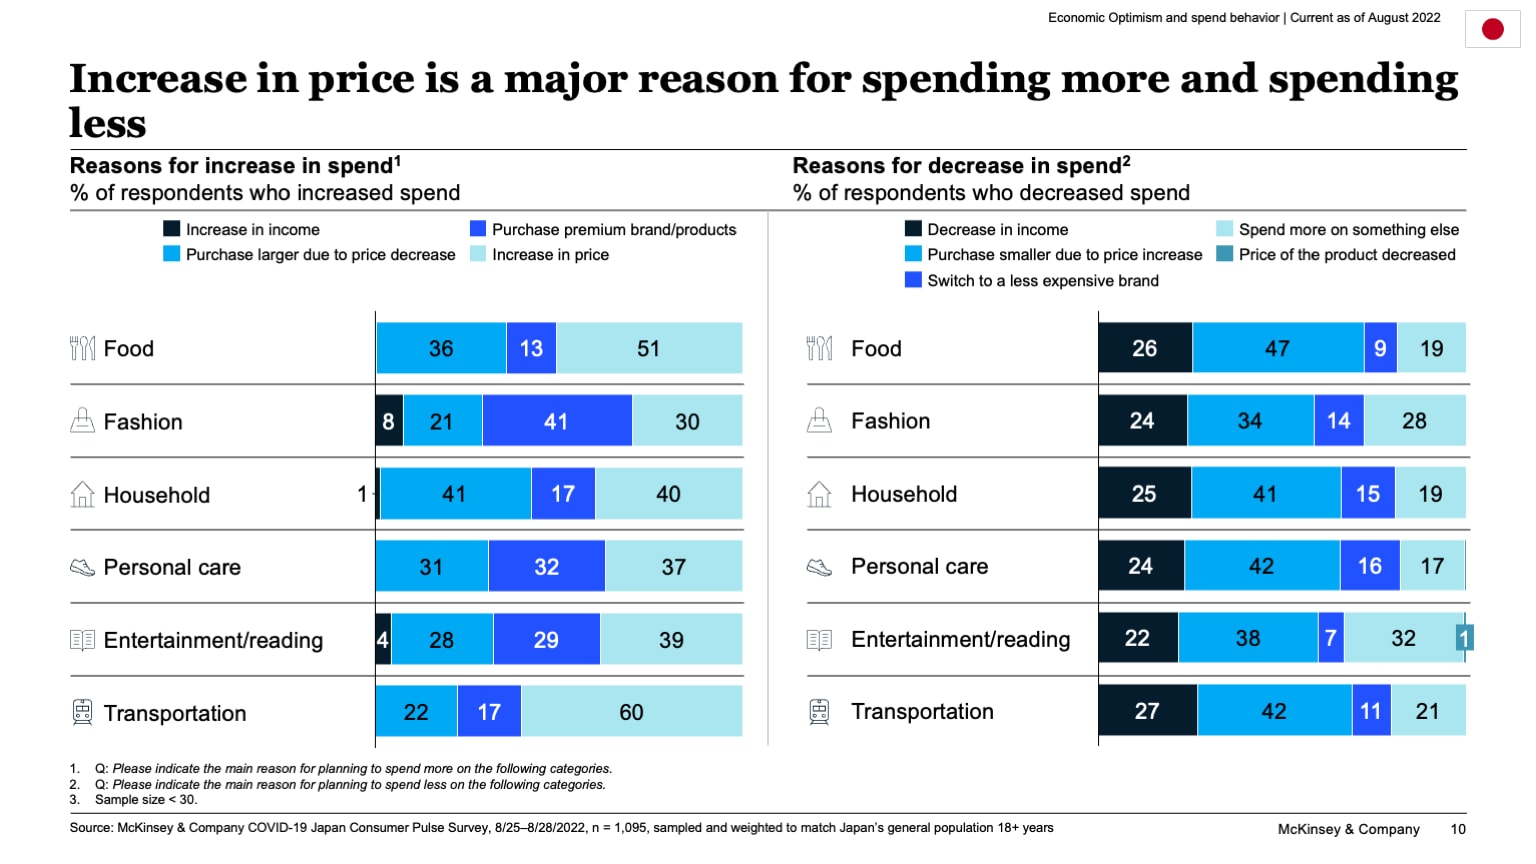 Increase in price is a major reason for spending more and spending less